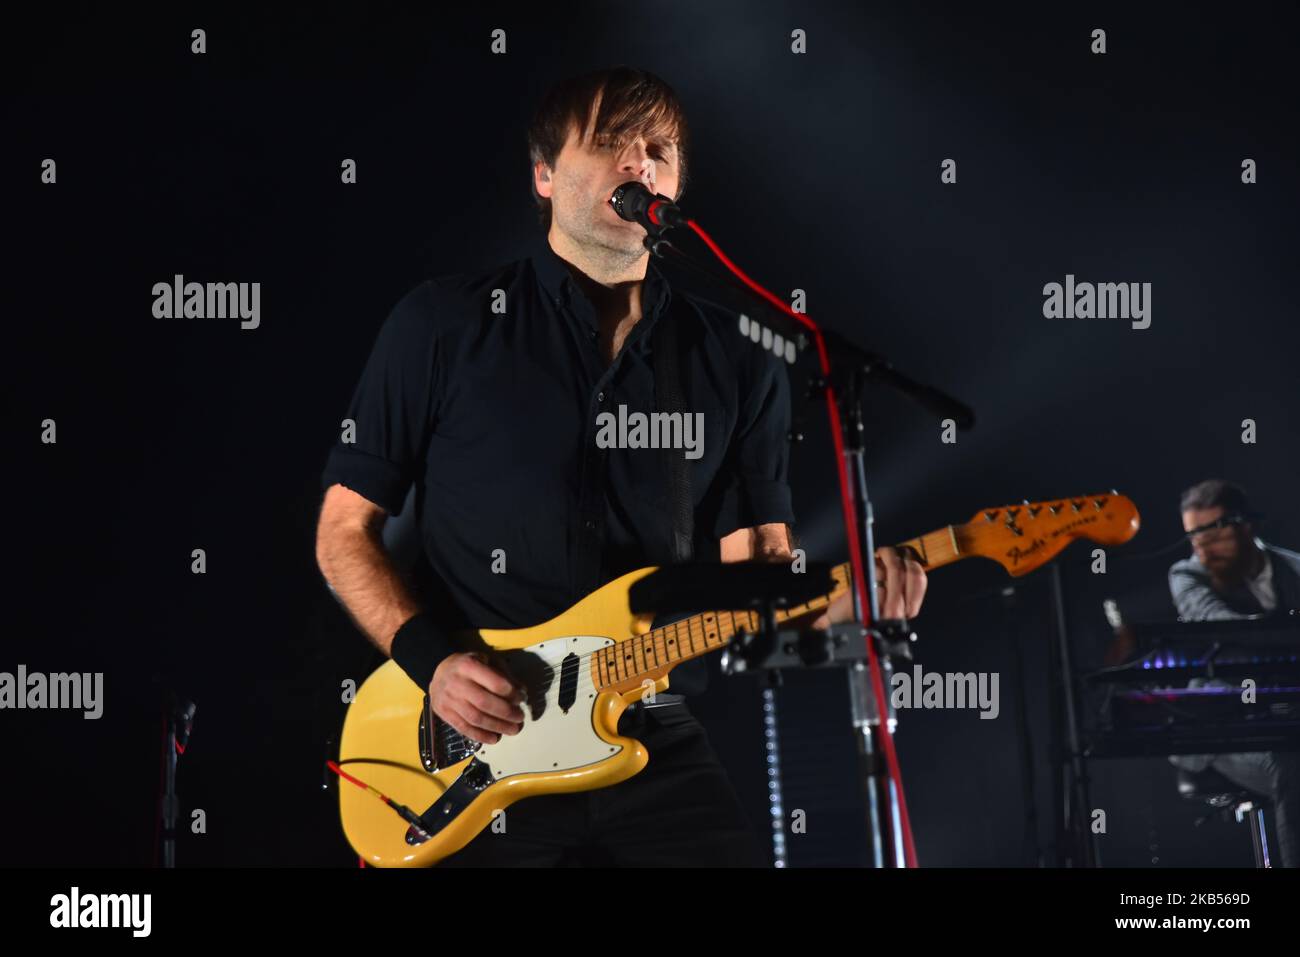 American alternative rock band Death Cab For Cutie perform live at Eventim Apollo in Hammersmith, London on February 1, 2019. The band is composed of Ben Gibbard (vocals, guitar, piano), Nick Harmer (bass), Dave Depper (guitar, keyboards, vocals), Zac Rae (keyboards, guitar), and Jason McGerr (drums) (Photo by Alberto Pezzali/NurPhoto) Stock Photo